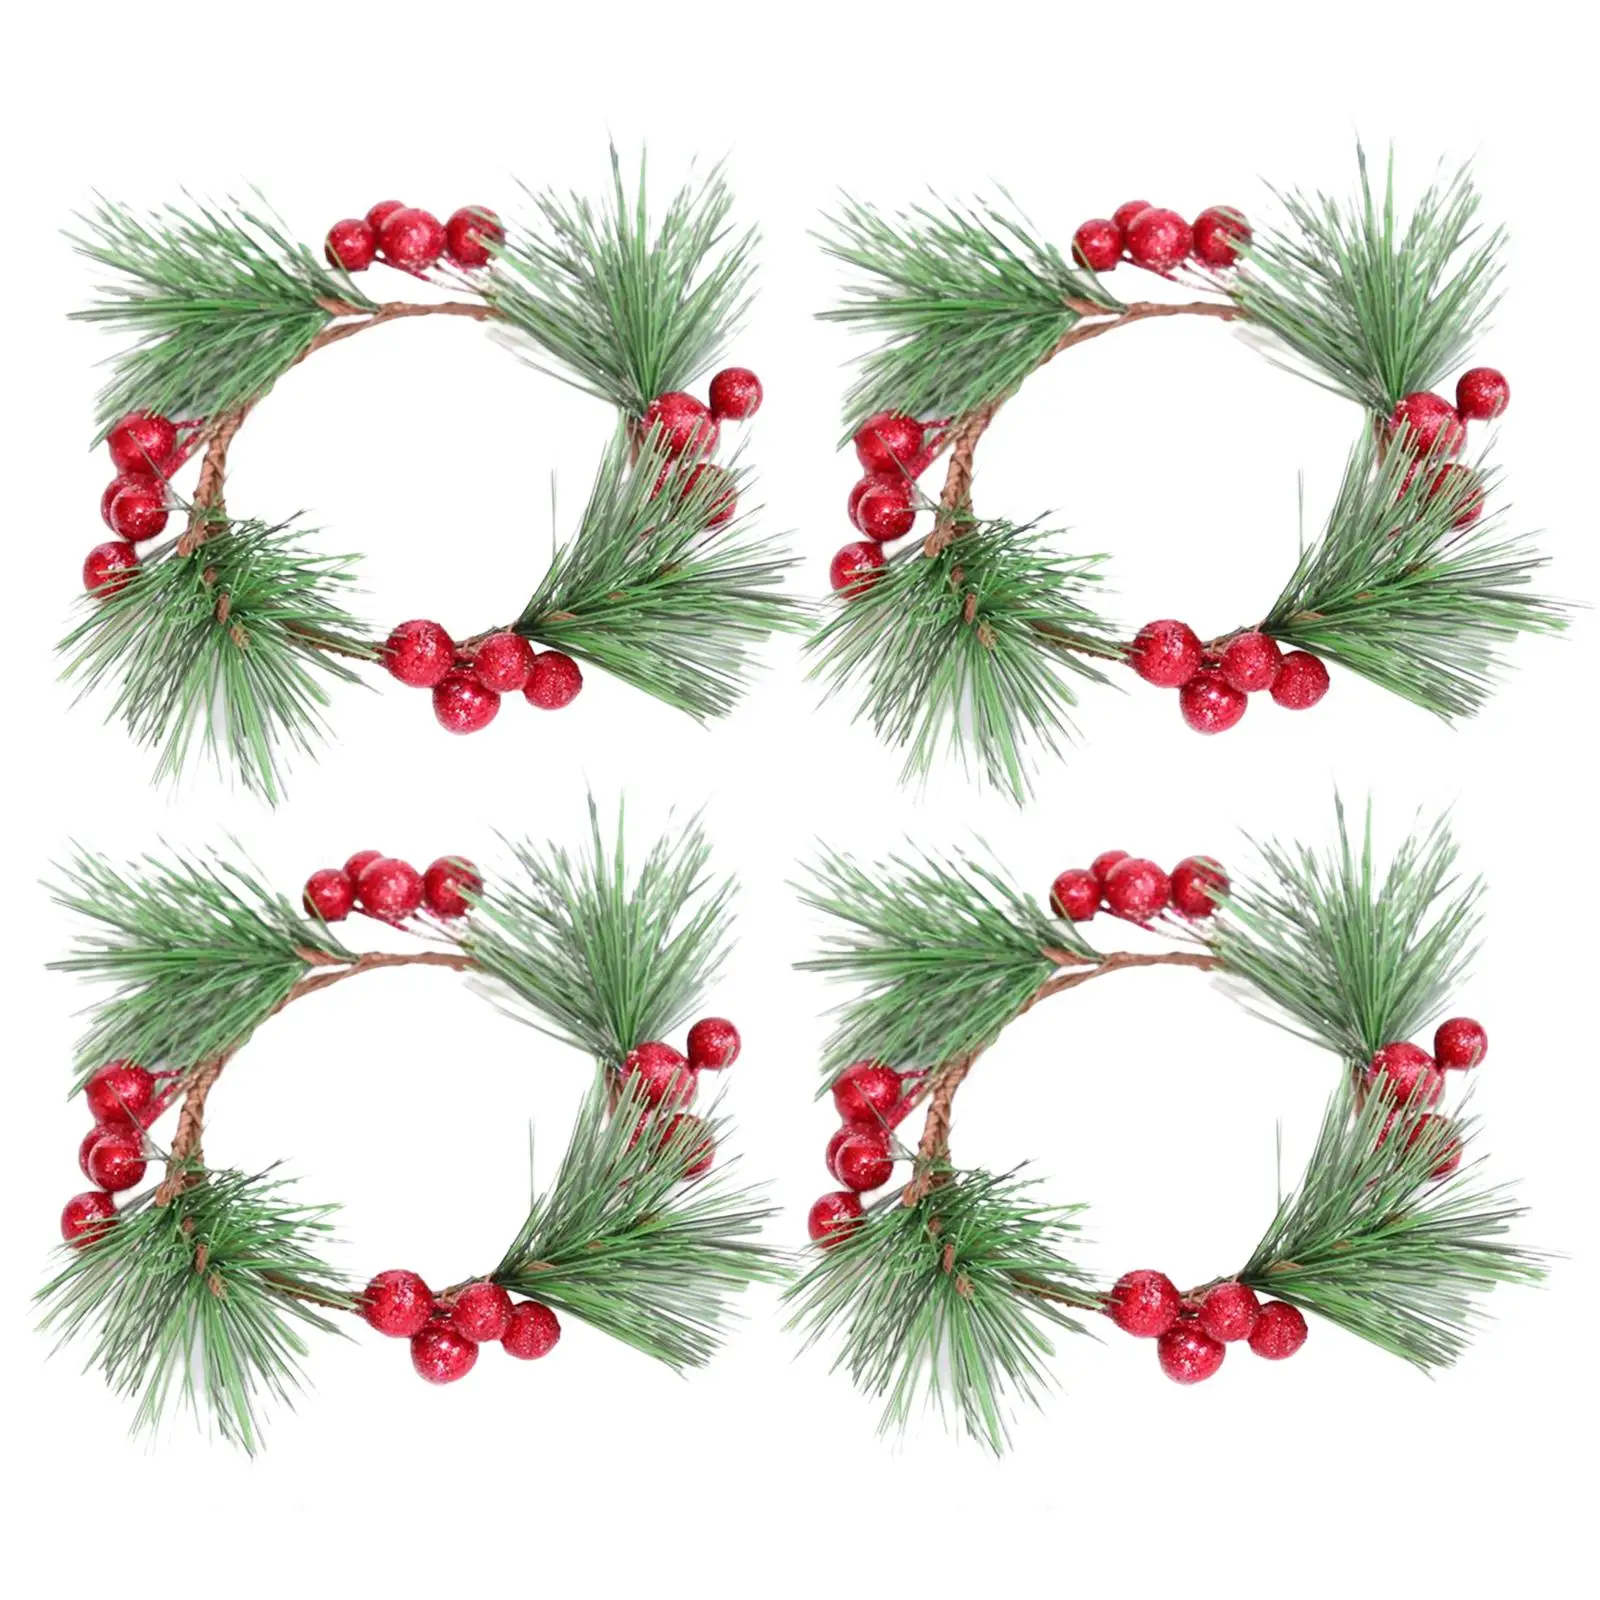 4x Candle Wreaths 3 Inches with Artificial Red Berries Decorative Small Wreath Candle Rings for Holiday Party Home Decor Accents